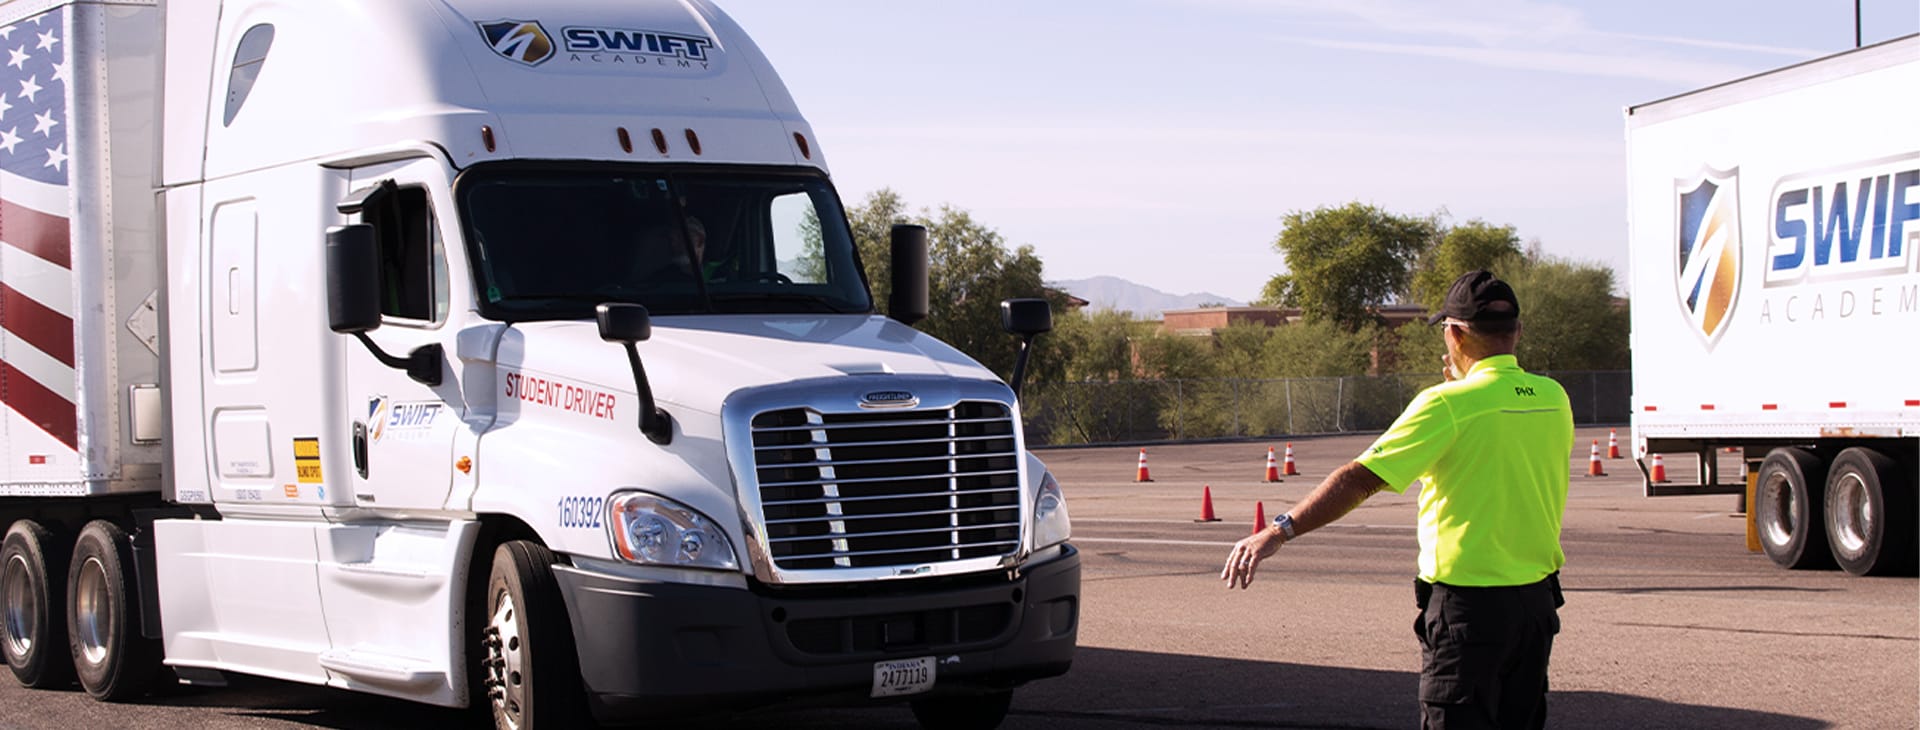 Why should I attend a Swift Transportation Truck Driving School? Earn $57k as a first year driver!